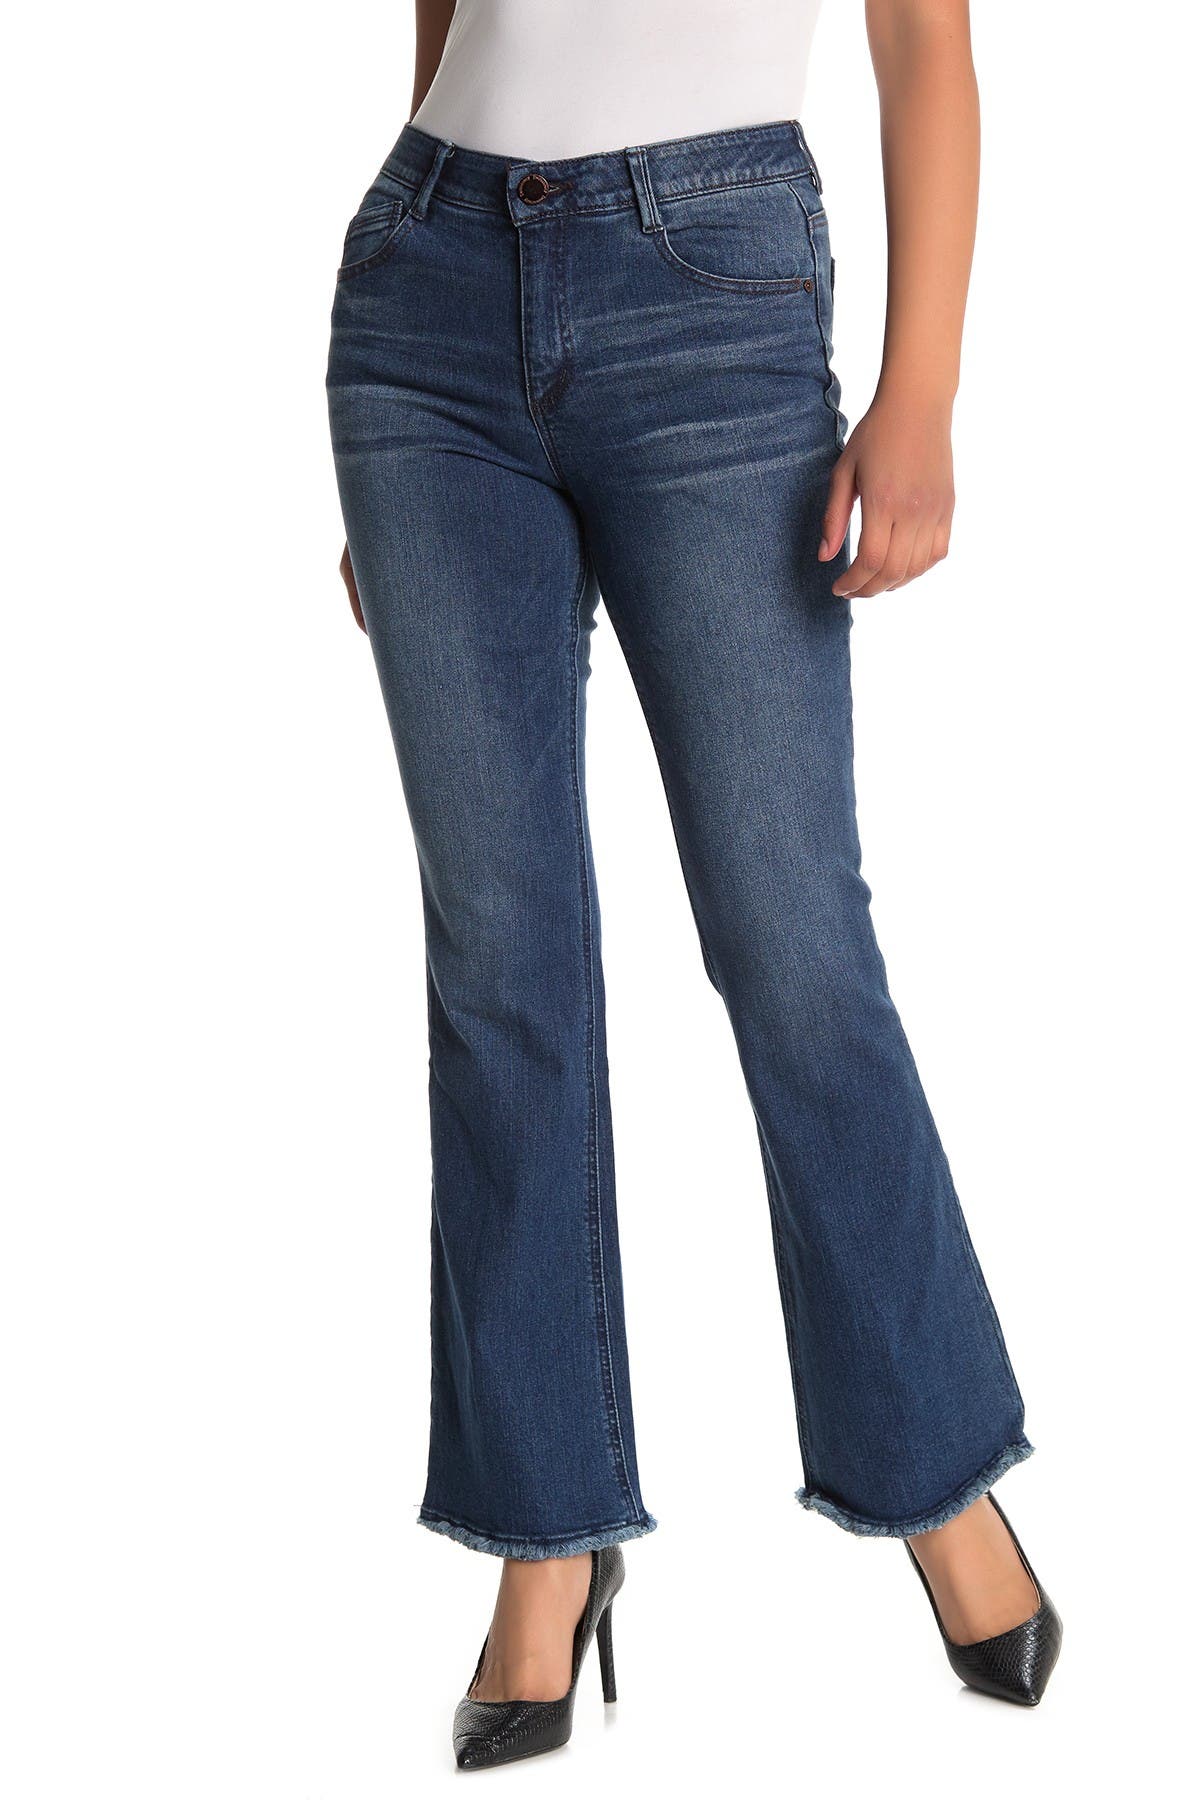 democracy jeans high rise